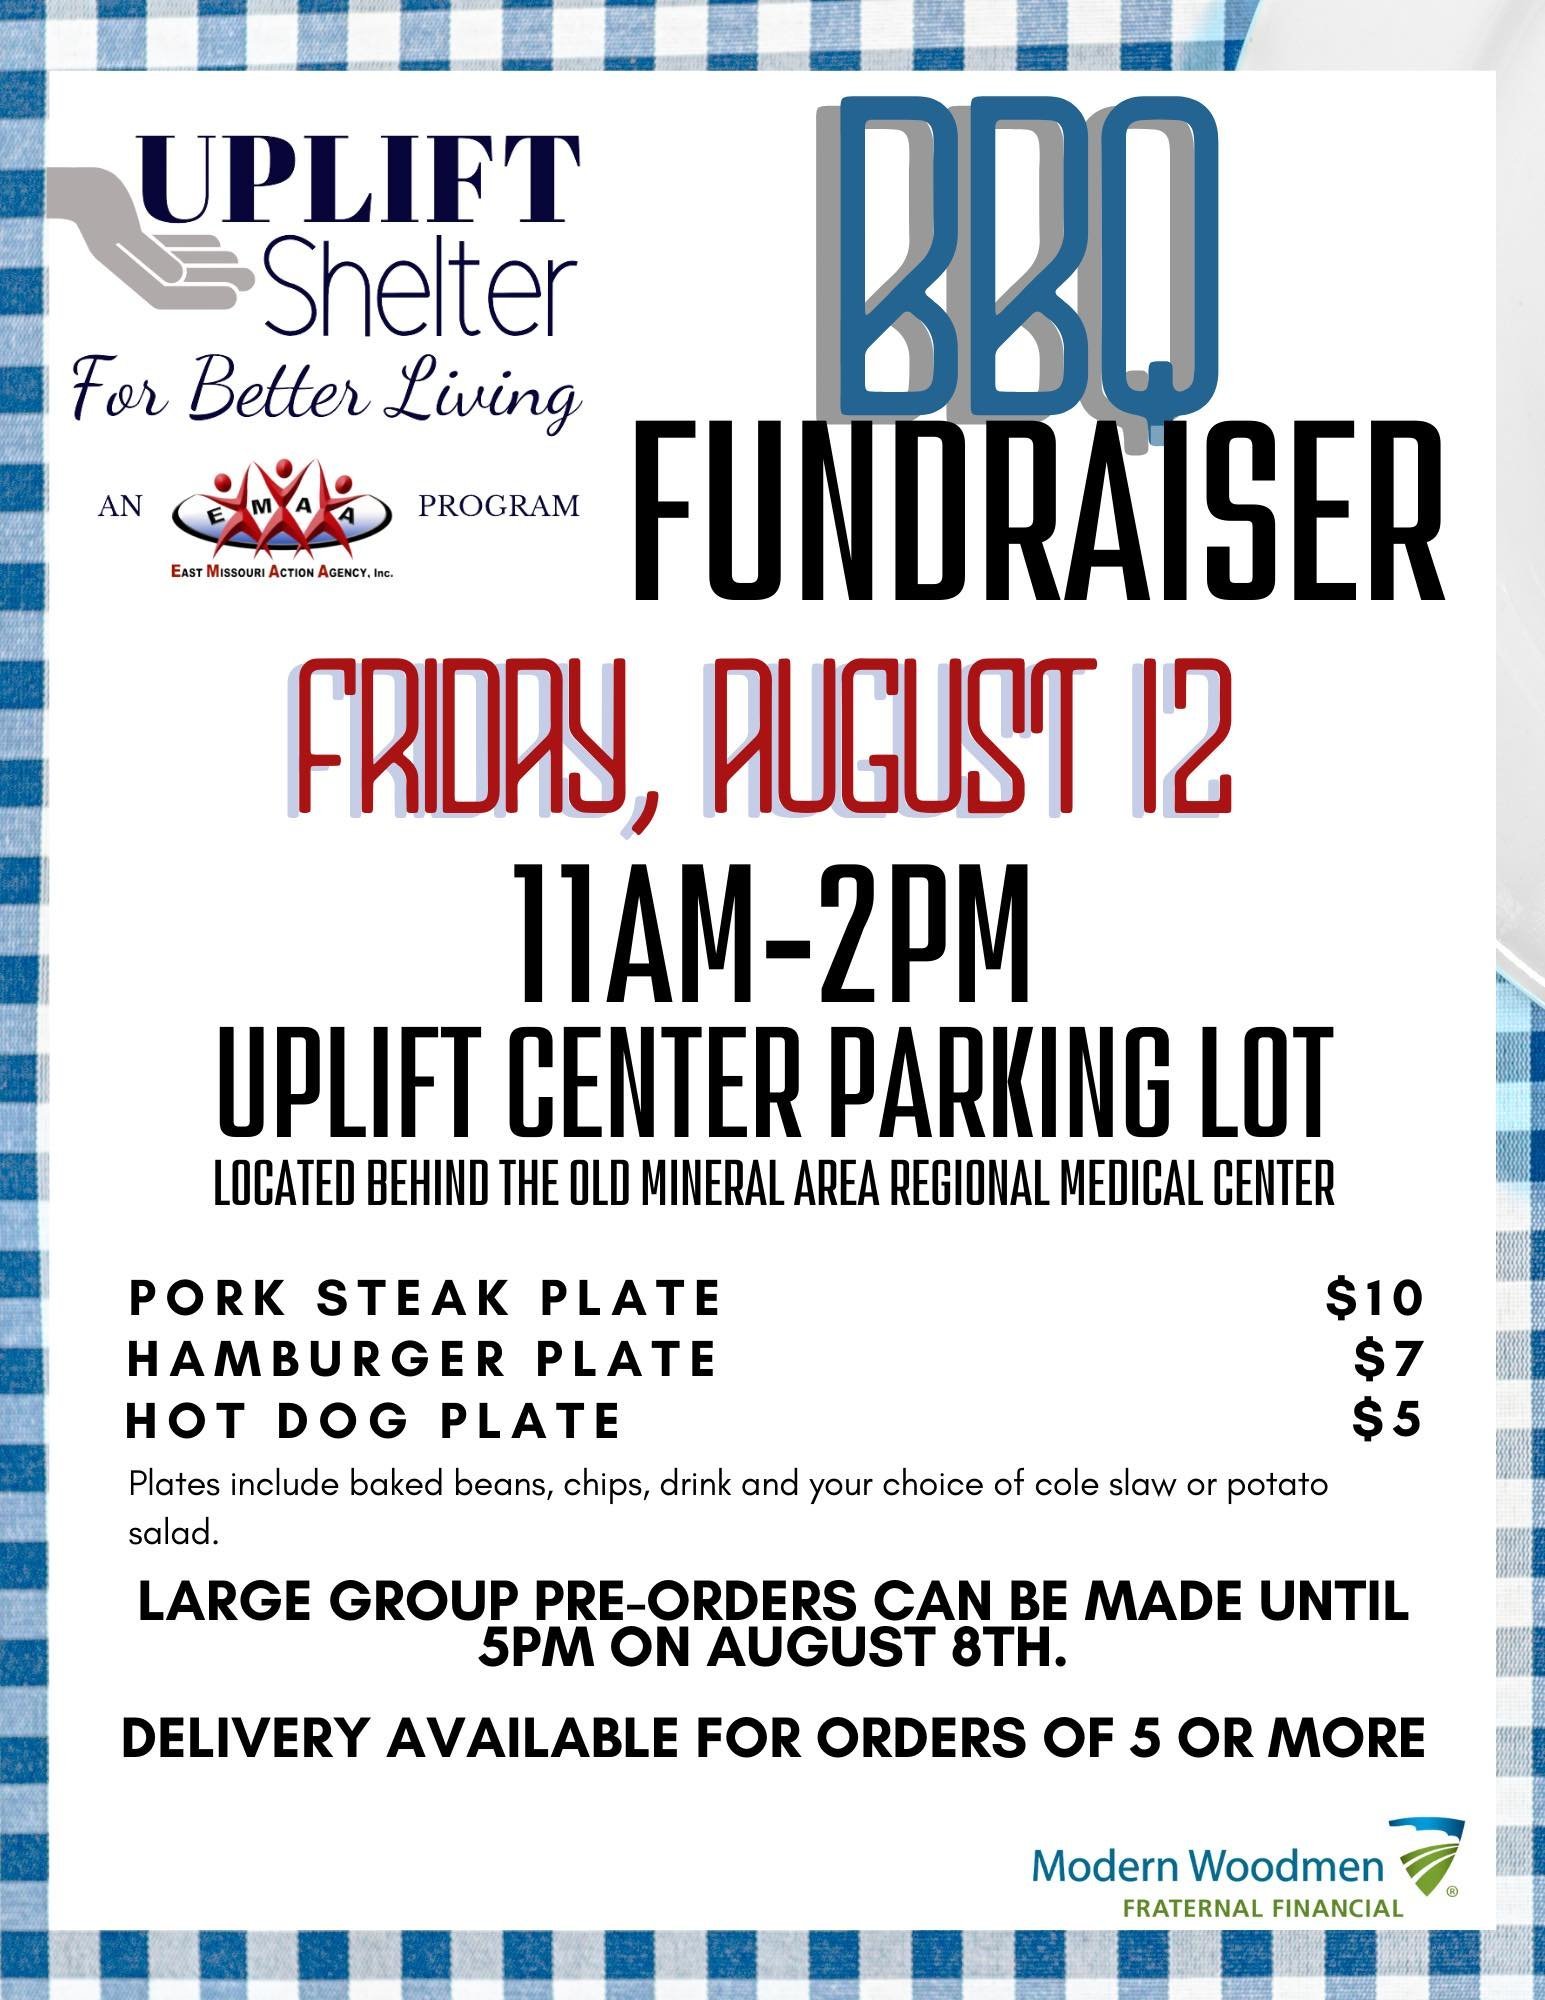 Barbecue for Shelter This Friday